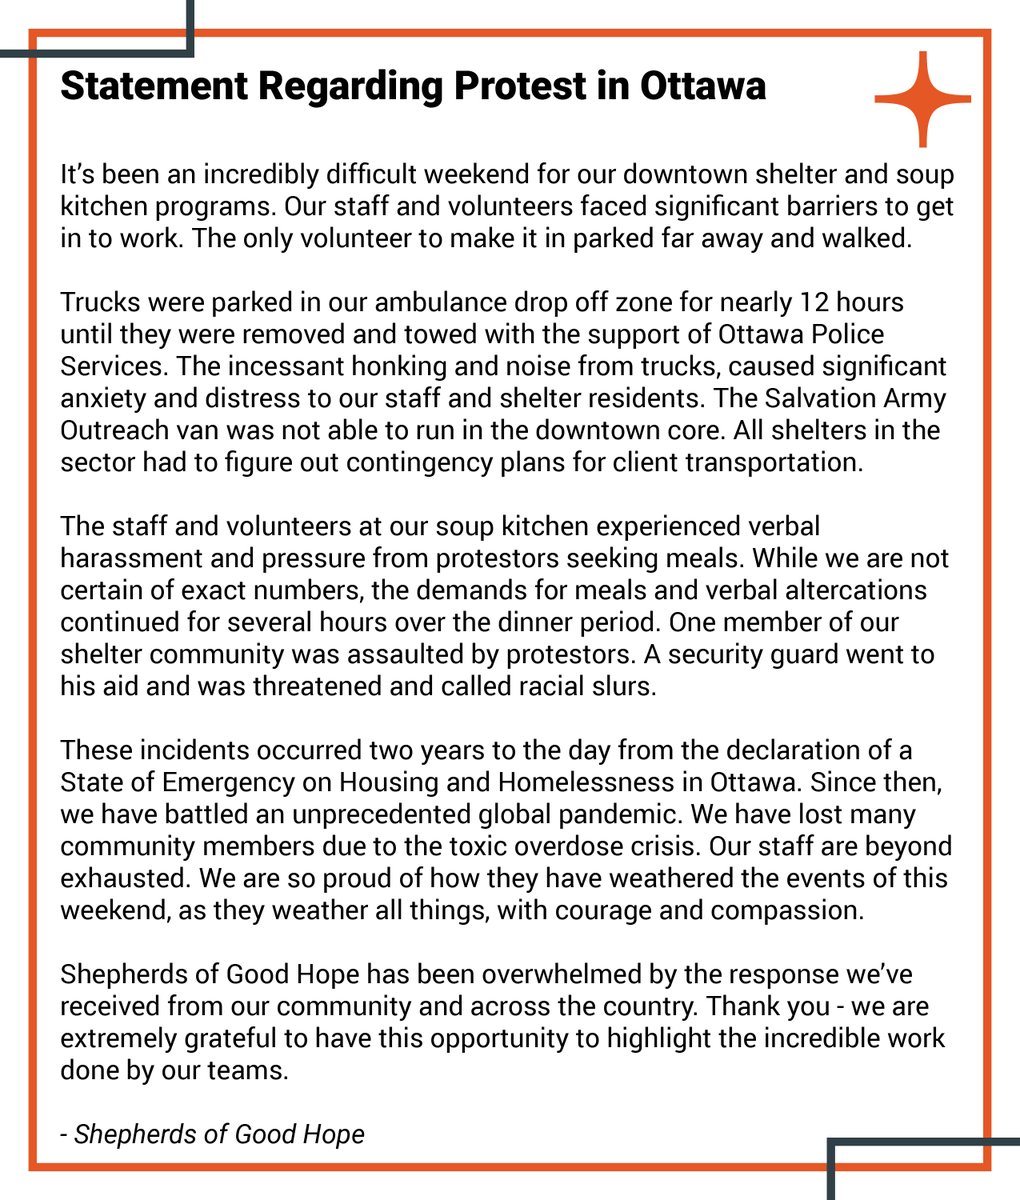 Friends, it's been a difficult 24 hours. Staff harassed for meals. A service user and security guard assaulted. Through it all, you have donated and filled our hearts with gratitude. Every cent will support people experiencing homelessness. Thank you. See our statement ⬇️